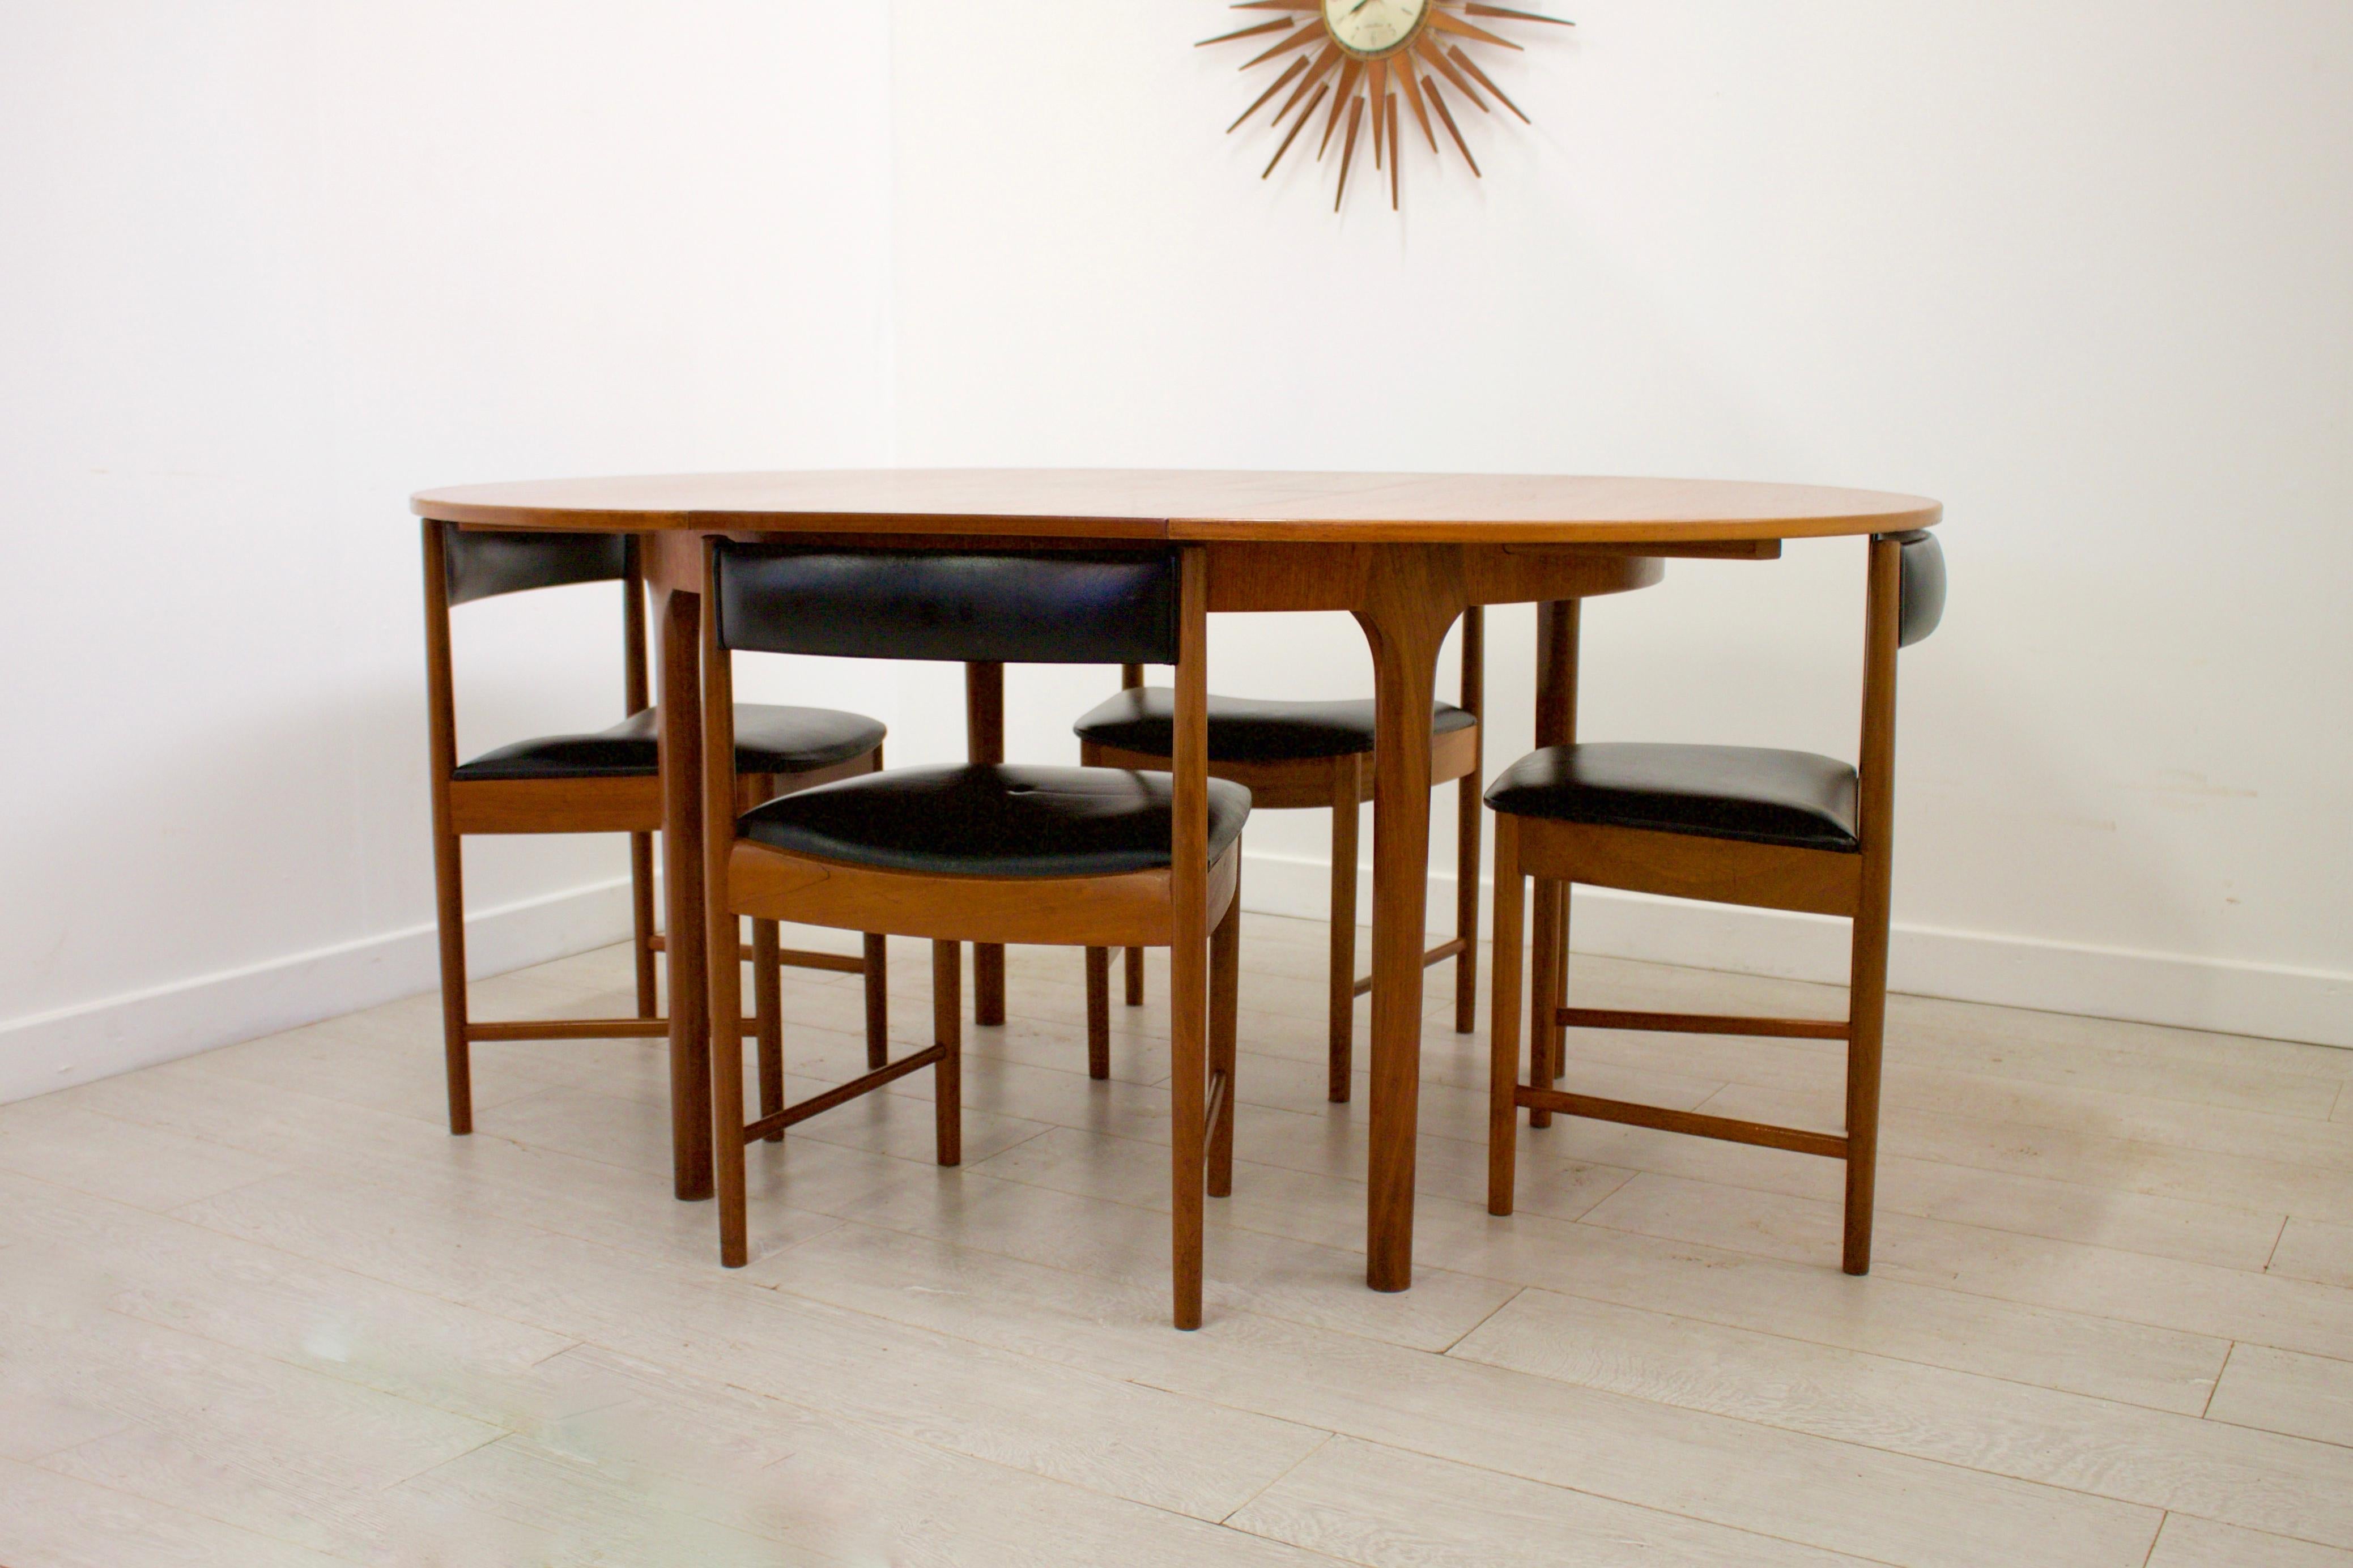 Veneer Midcentury Teak Extendable Dining Table with 4 Chairs from McIntosh, 1960s